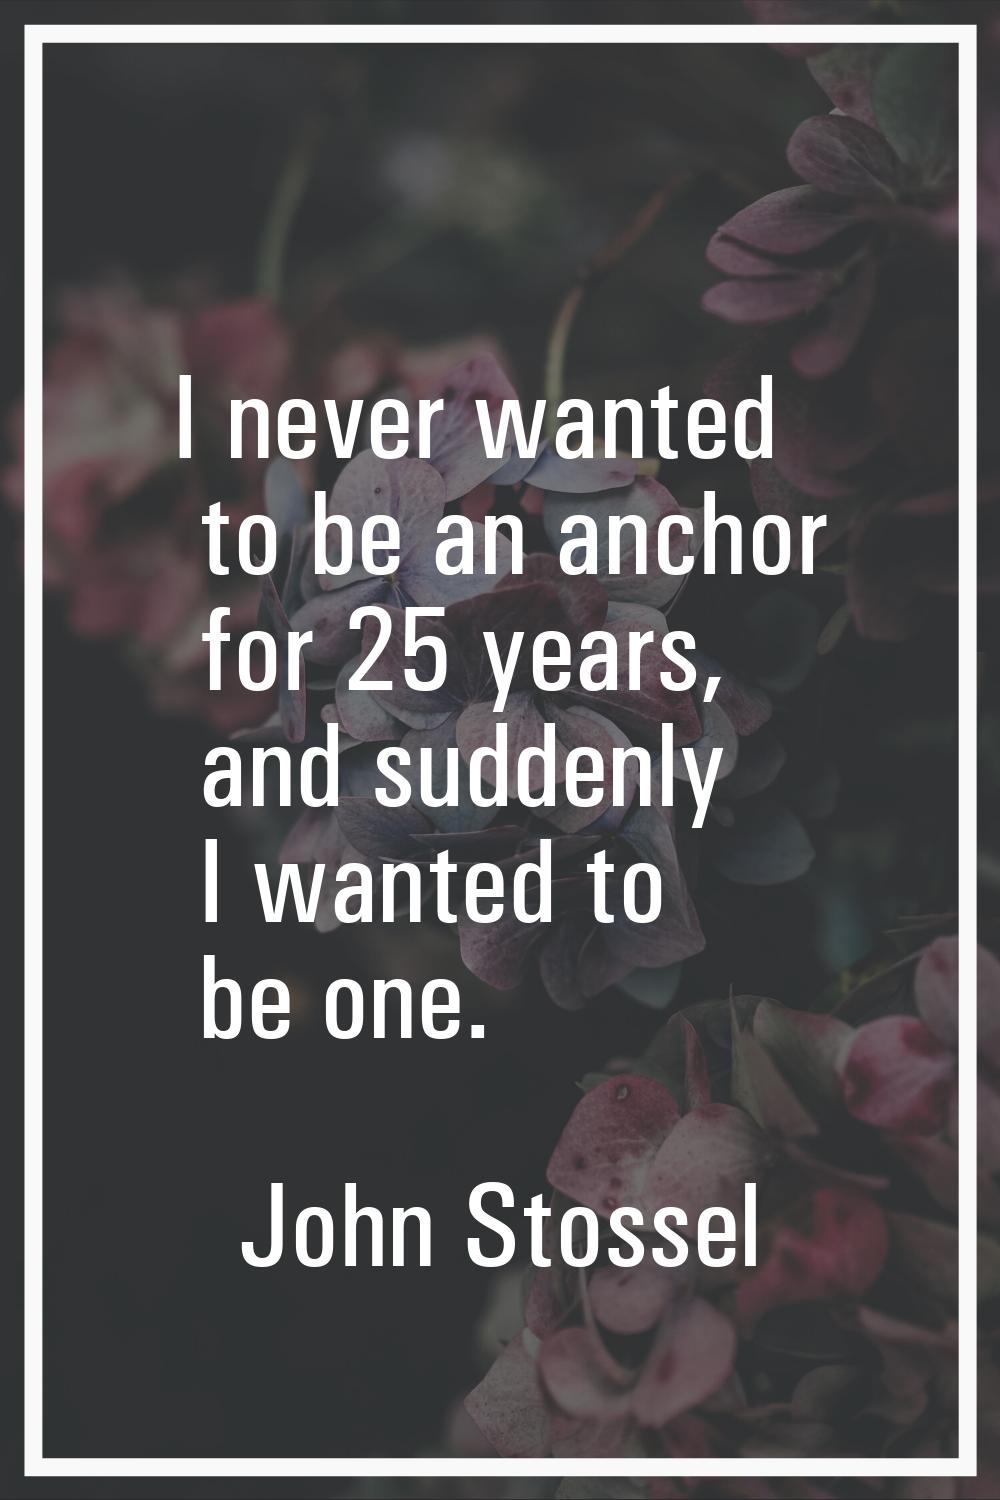 I never wanted to be an anchor for 25 years, and suddenly I wanted to be one.